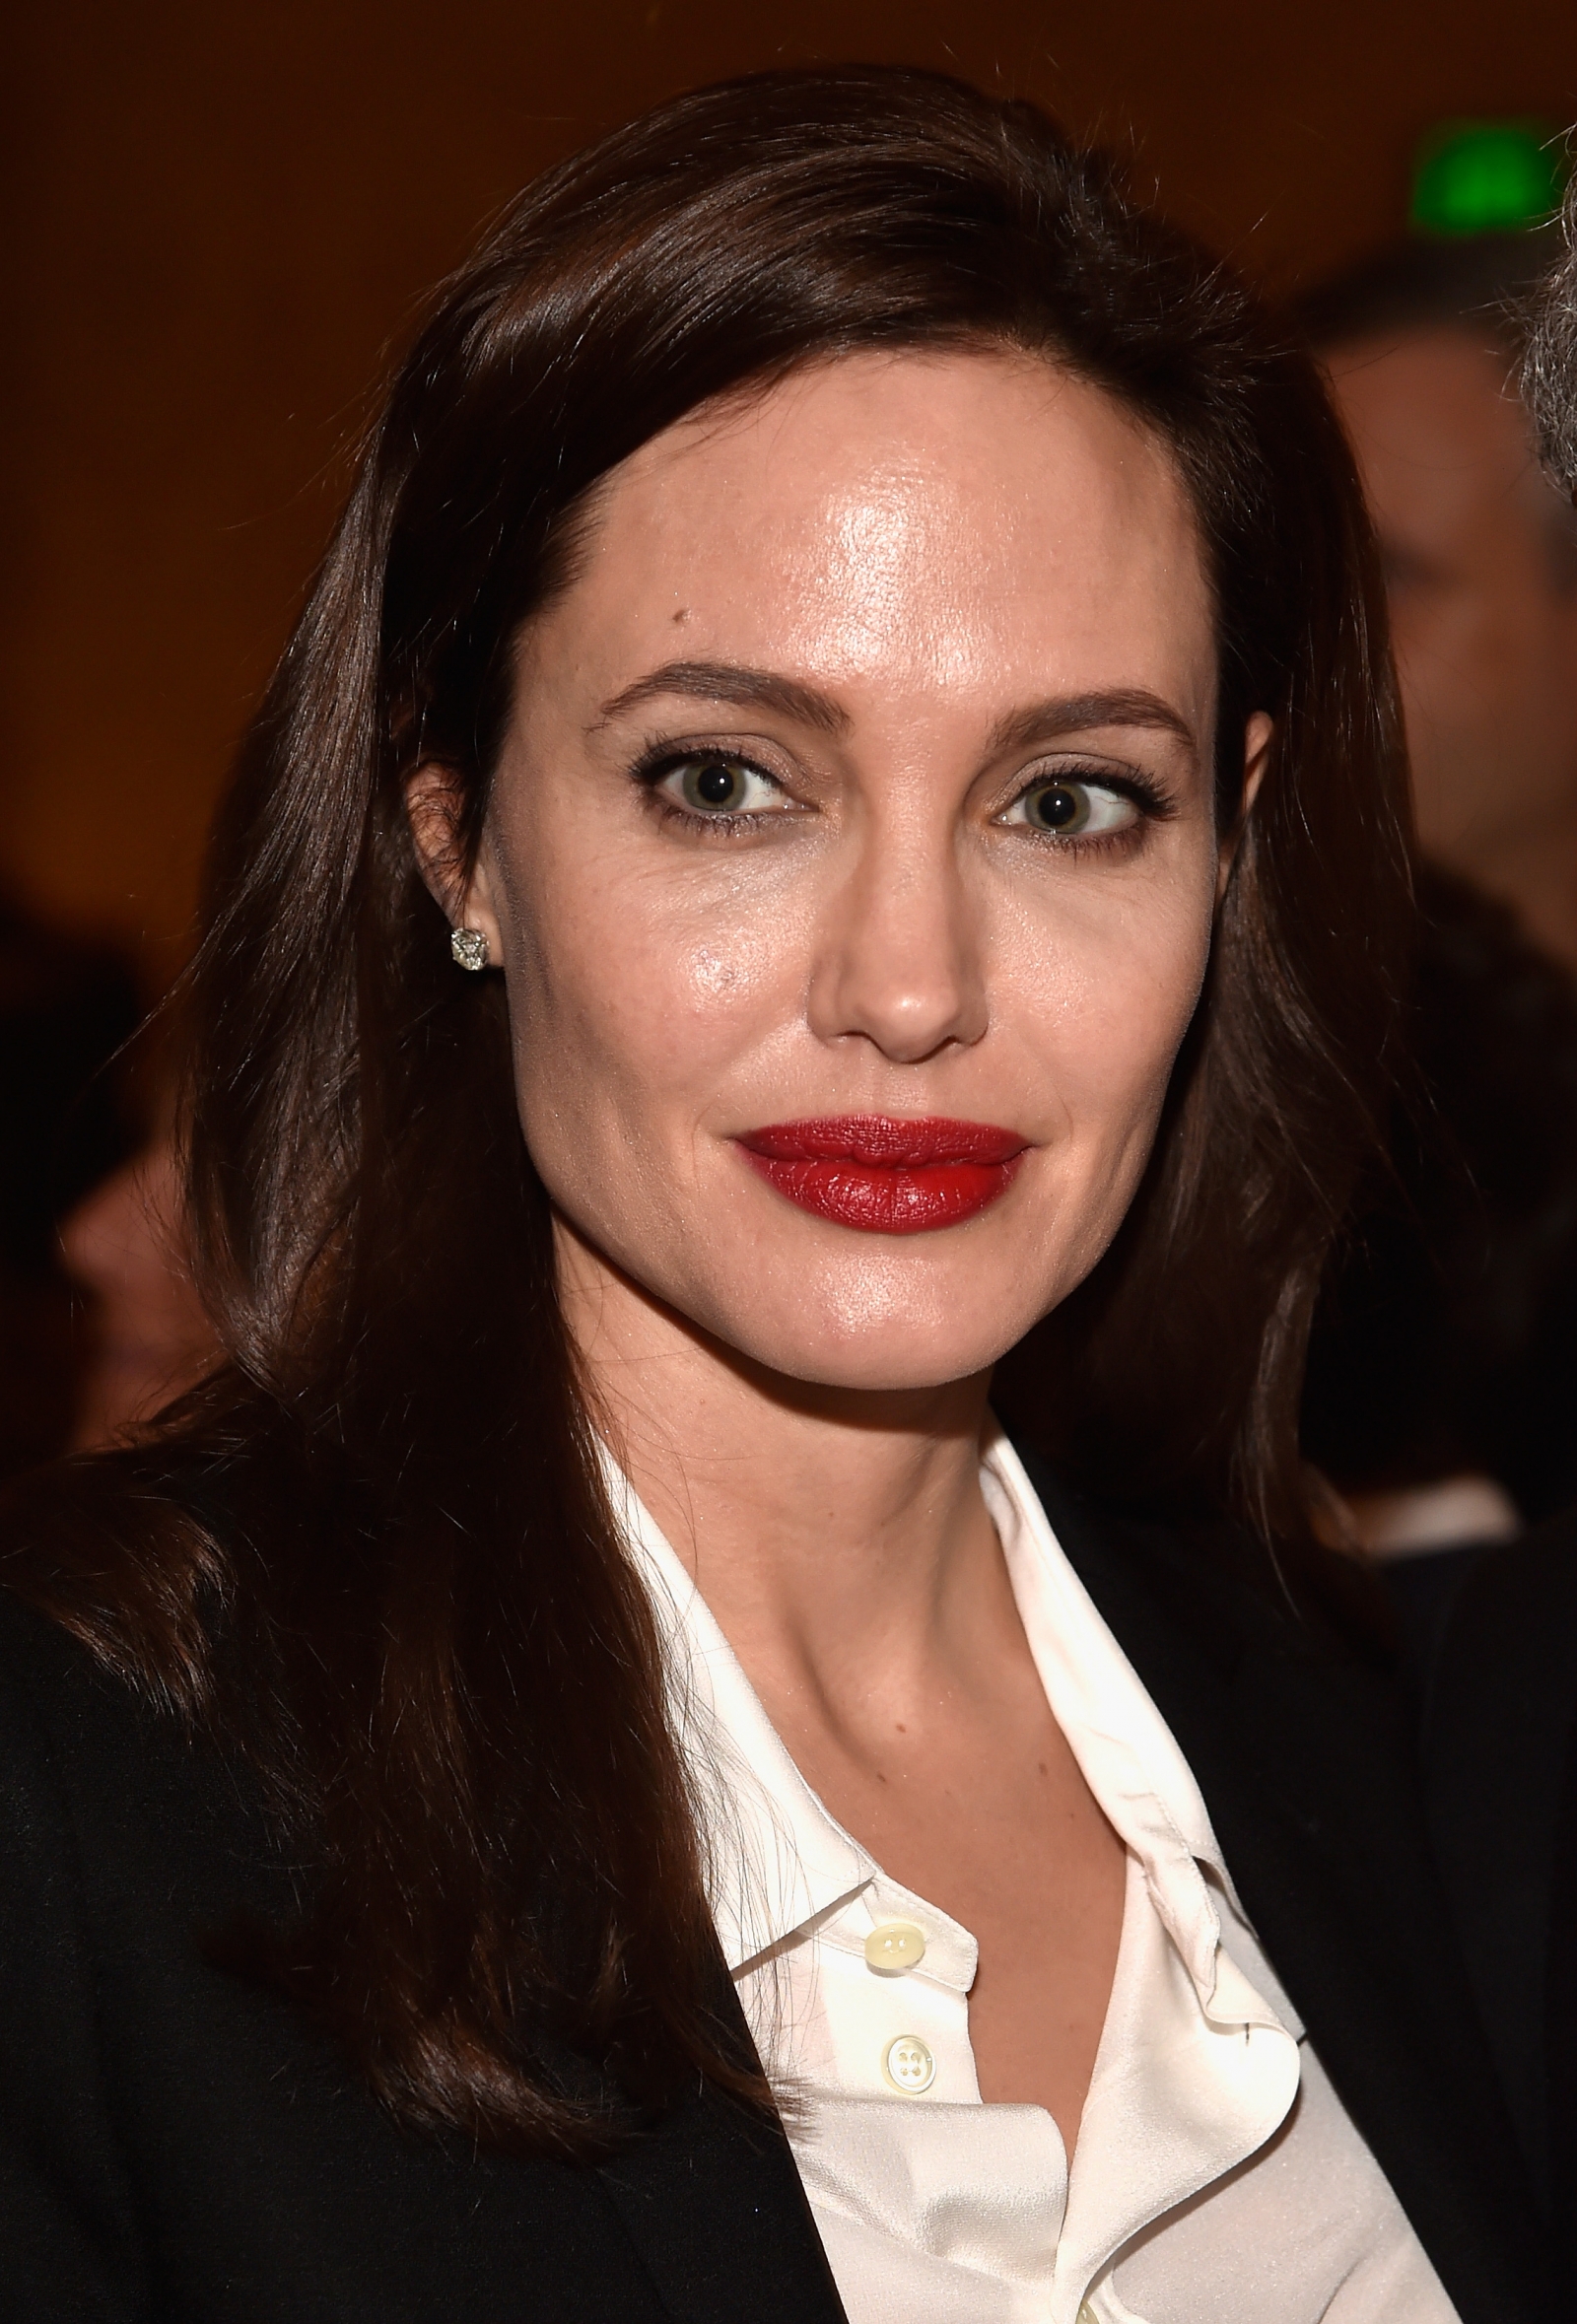 Facial Porn Angelina Jolie - Emotional Angelina Jolie fights back tears speaking about 'difficult time'  after split from Brad Pitt